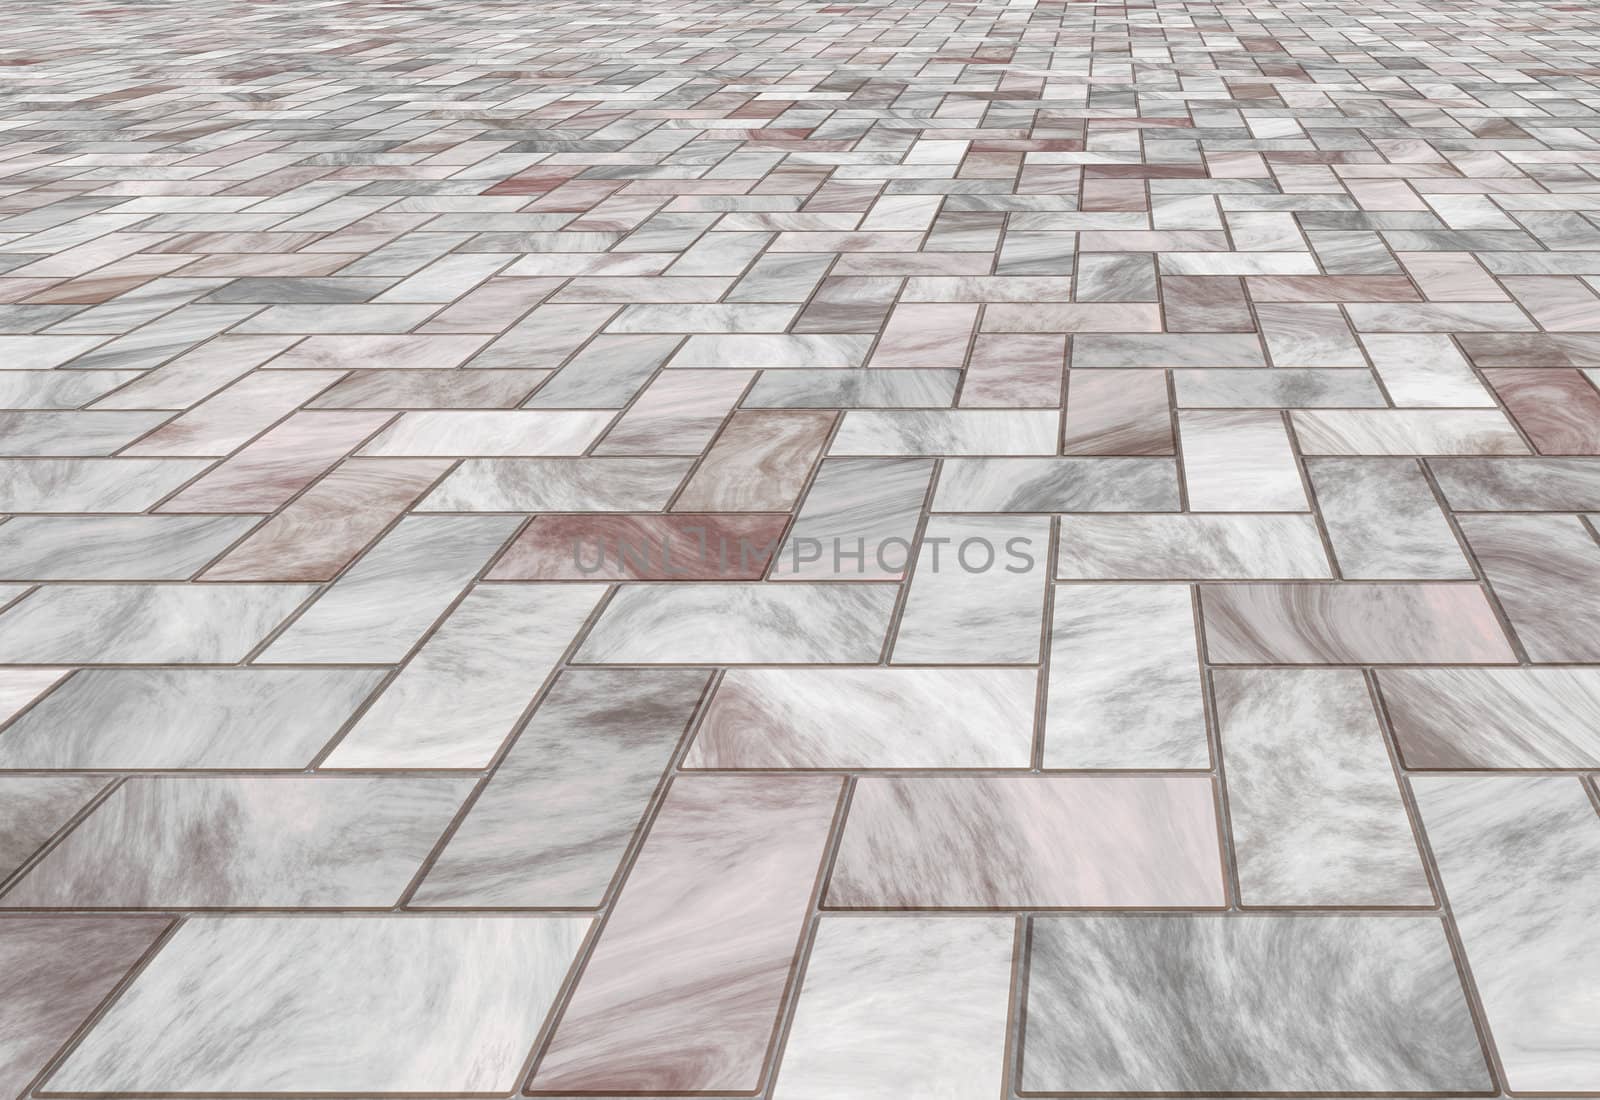 paved stone or marble tiles on the floor 